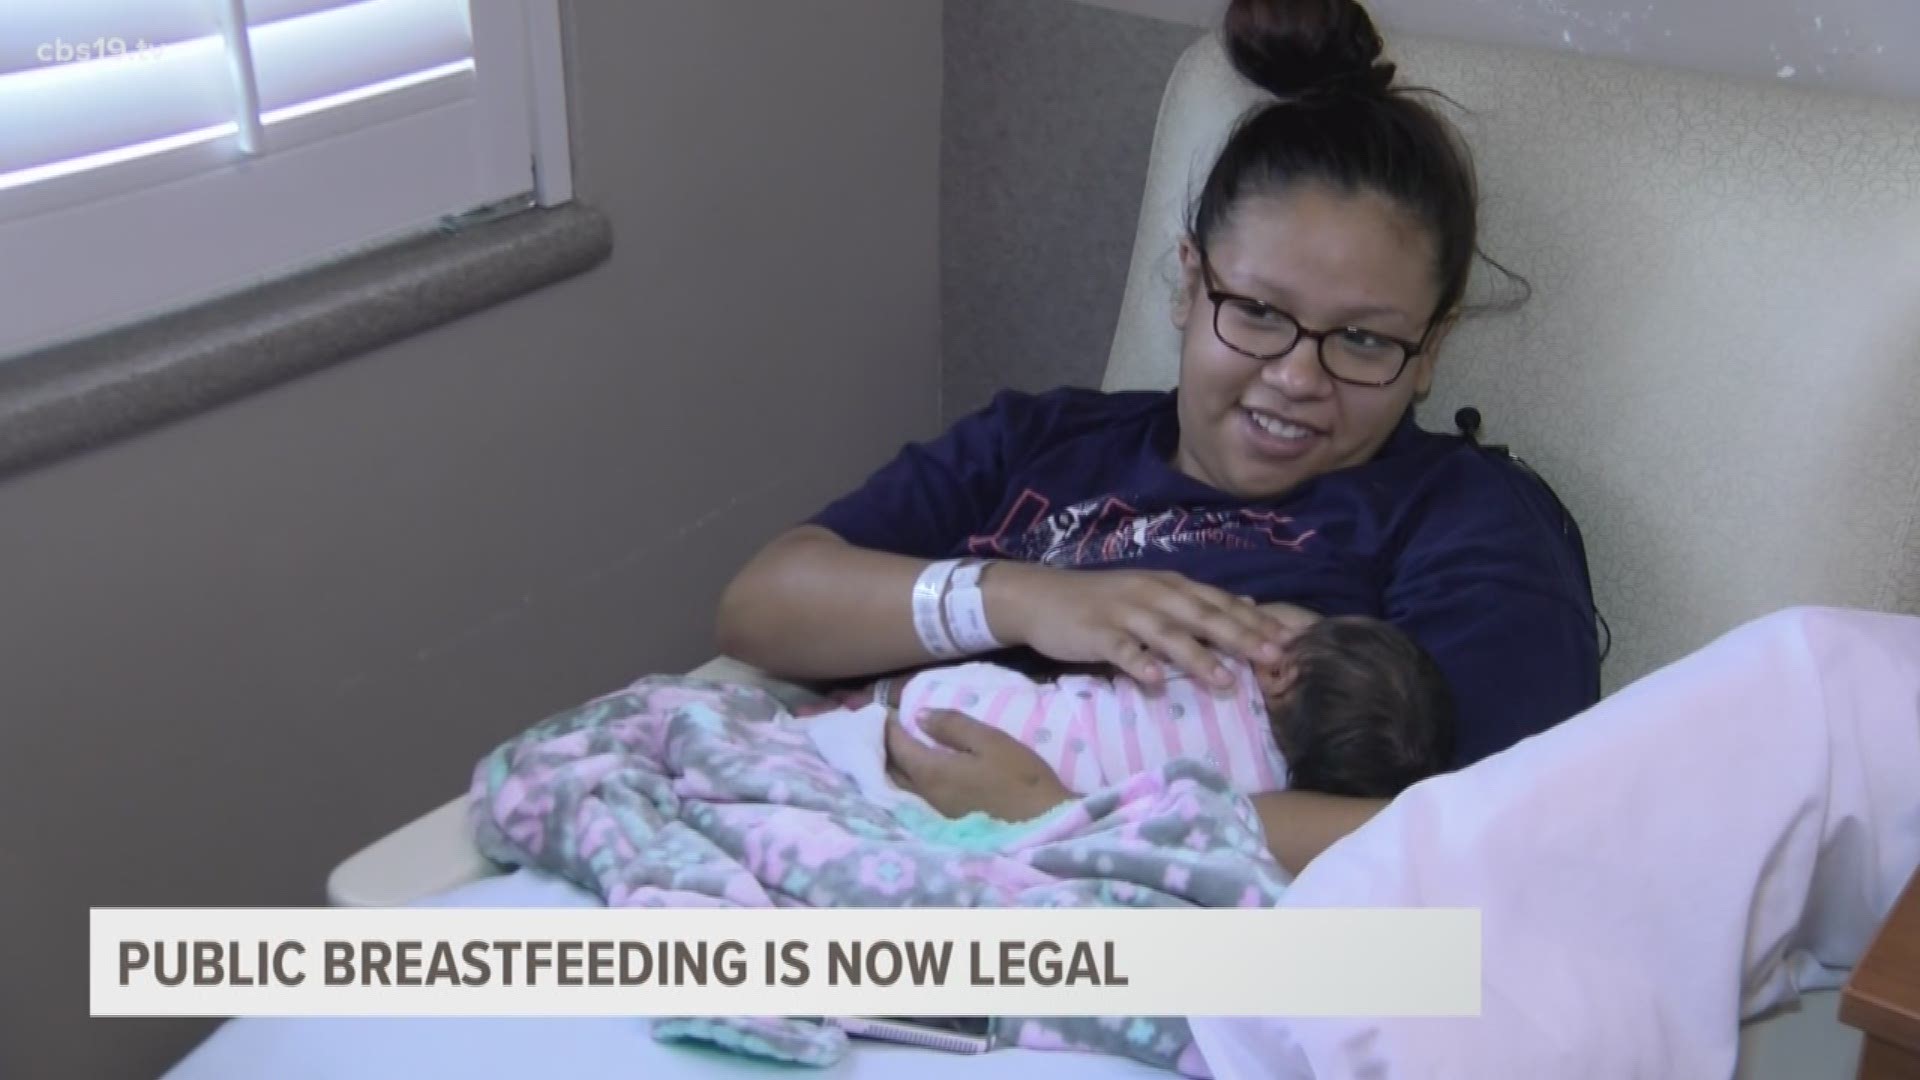 Breastfeeding in public is now legal in all 50 states. It's been legal in Texas since 2015, but some moms still experience public shaming. 